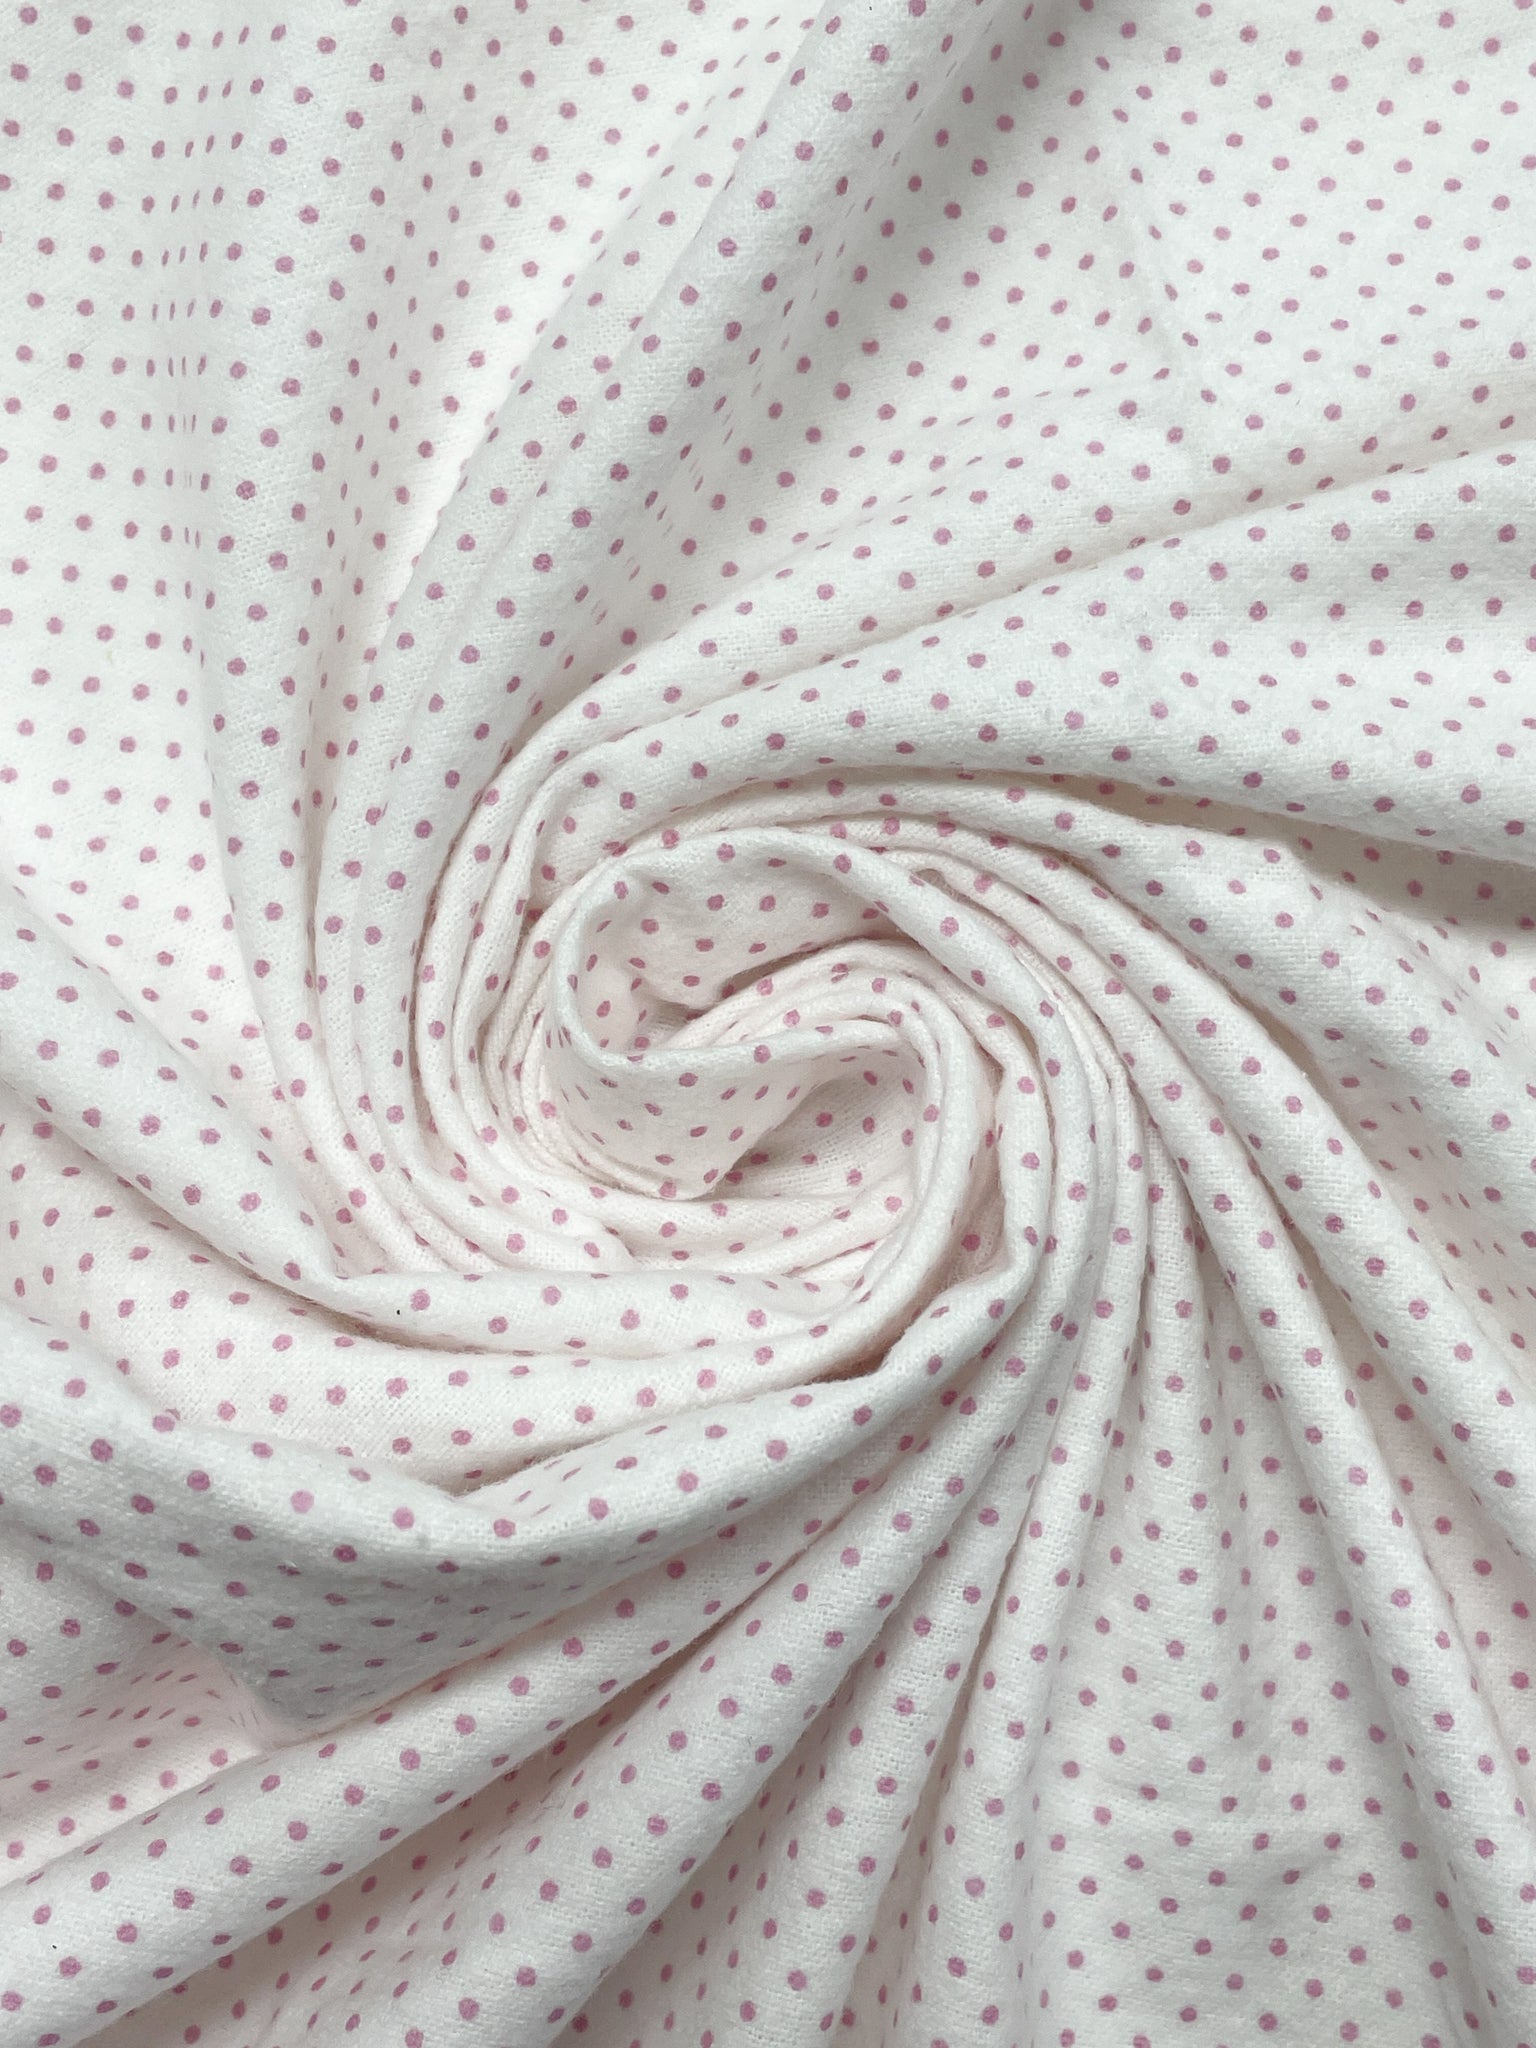 Cotton Flannel - White with Pink Polka Dots